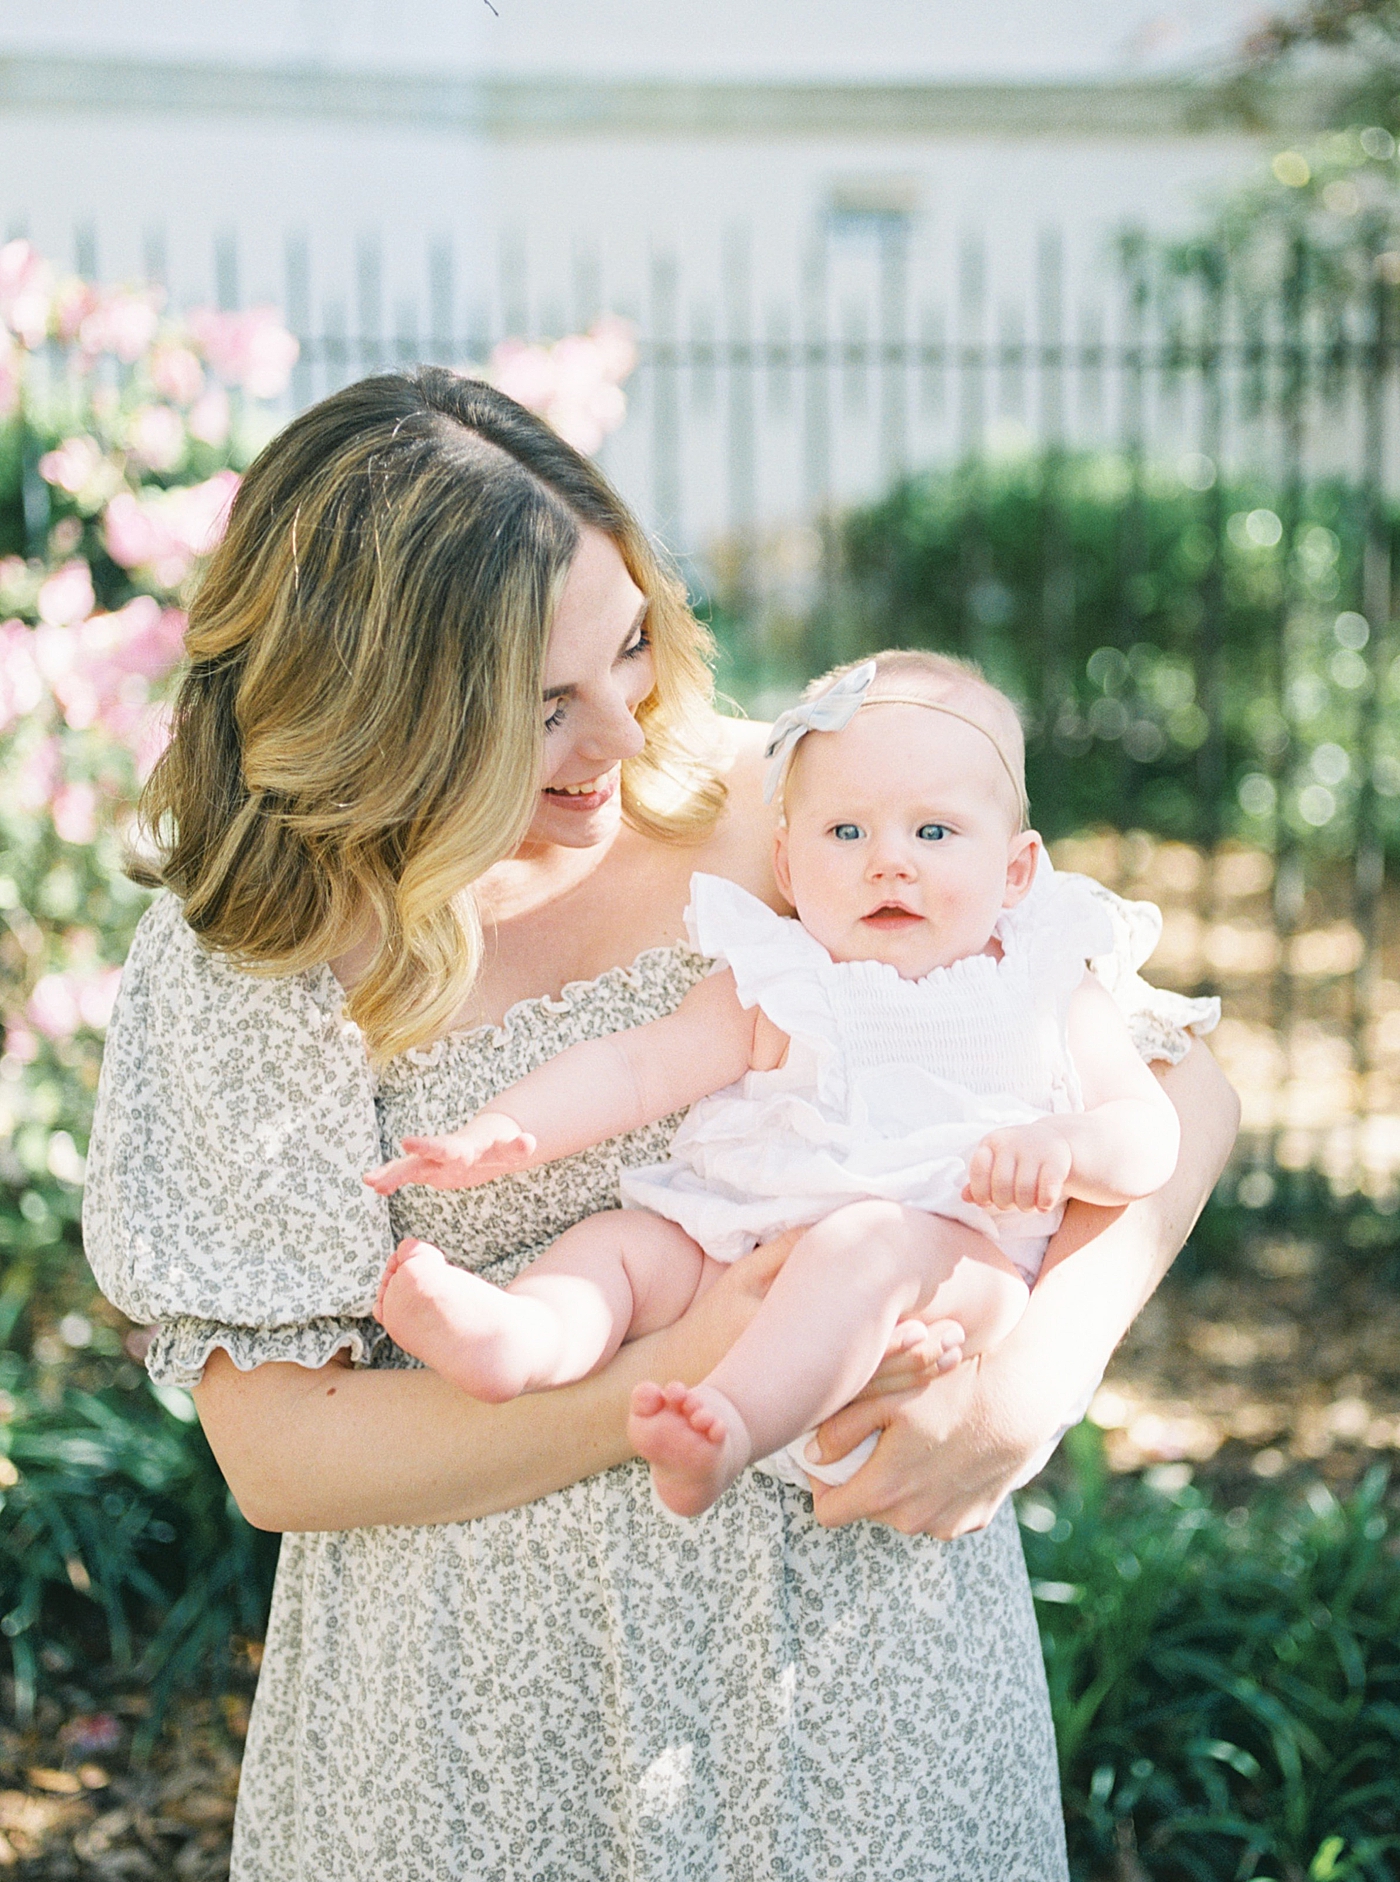 Mother in a spring dress holding and smiling at her baby | Image by Caitlyn Motycka